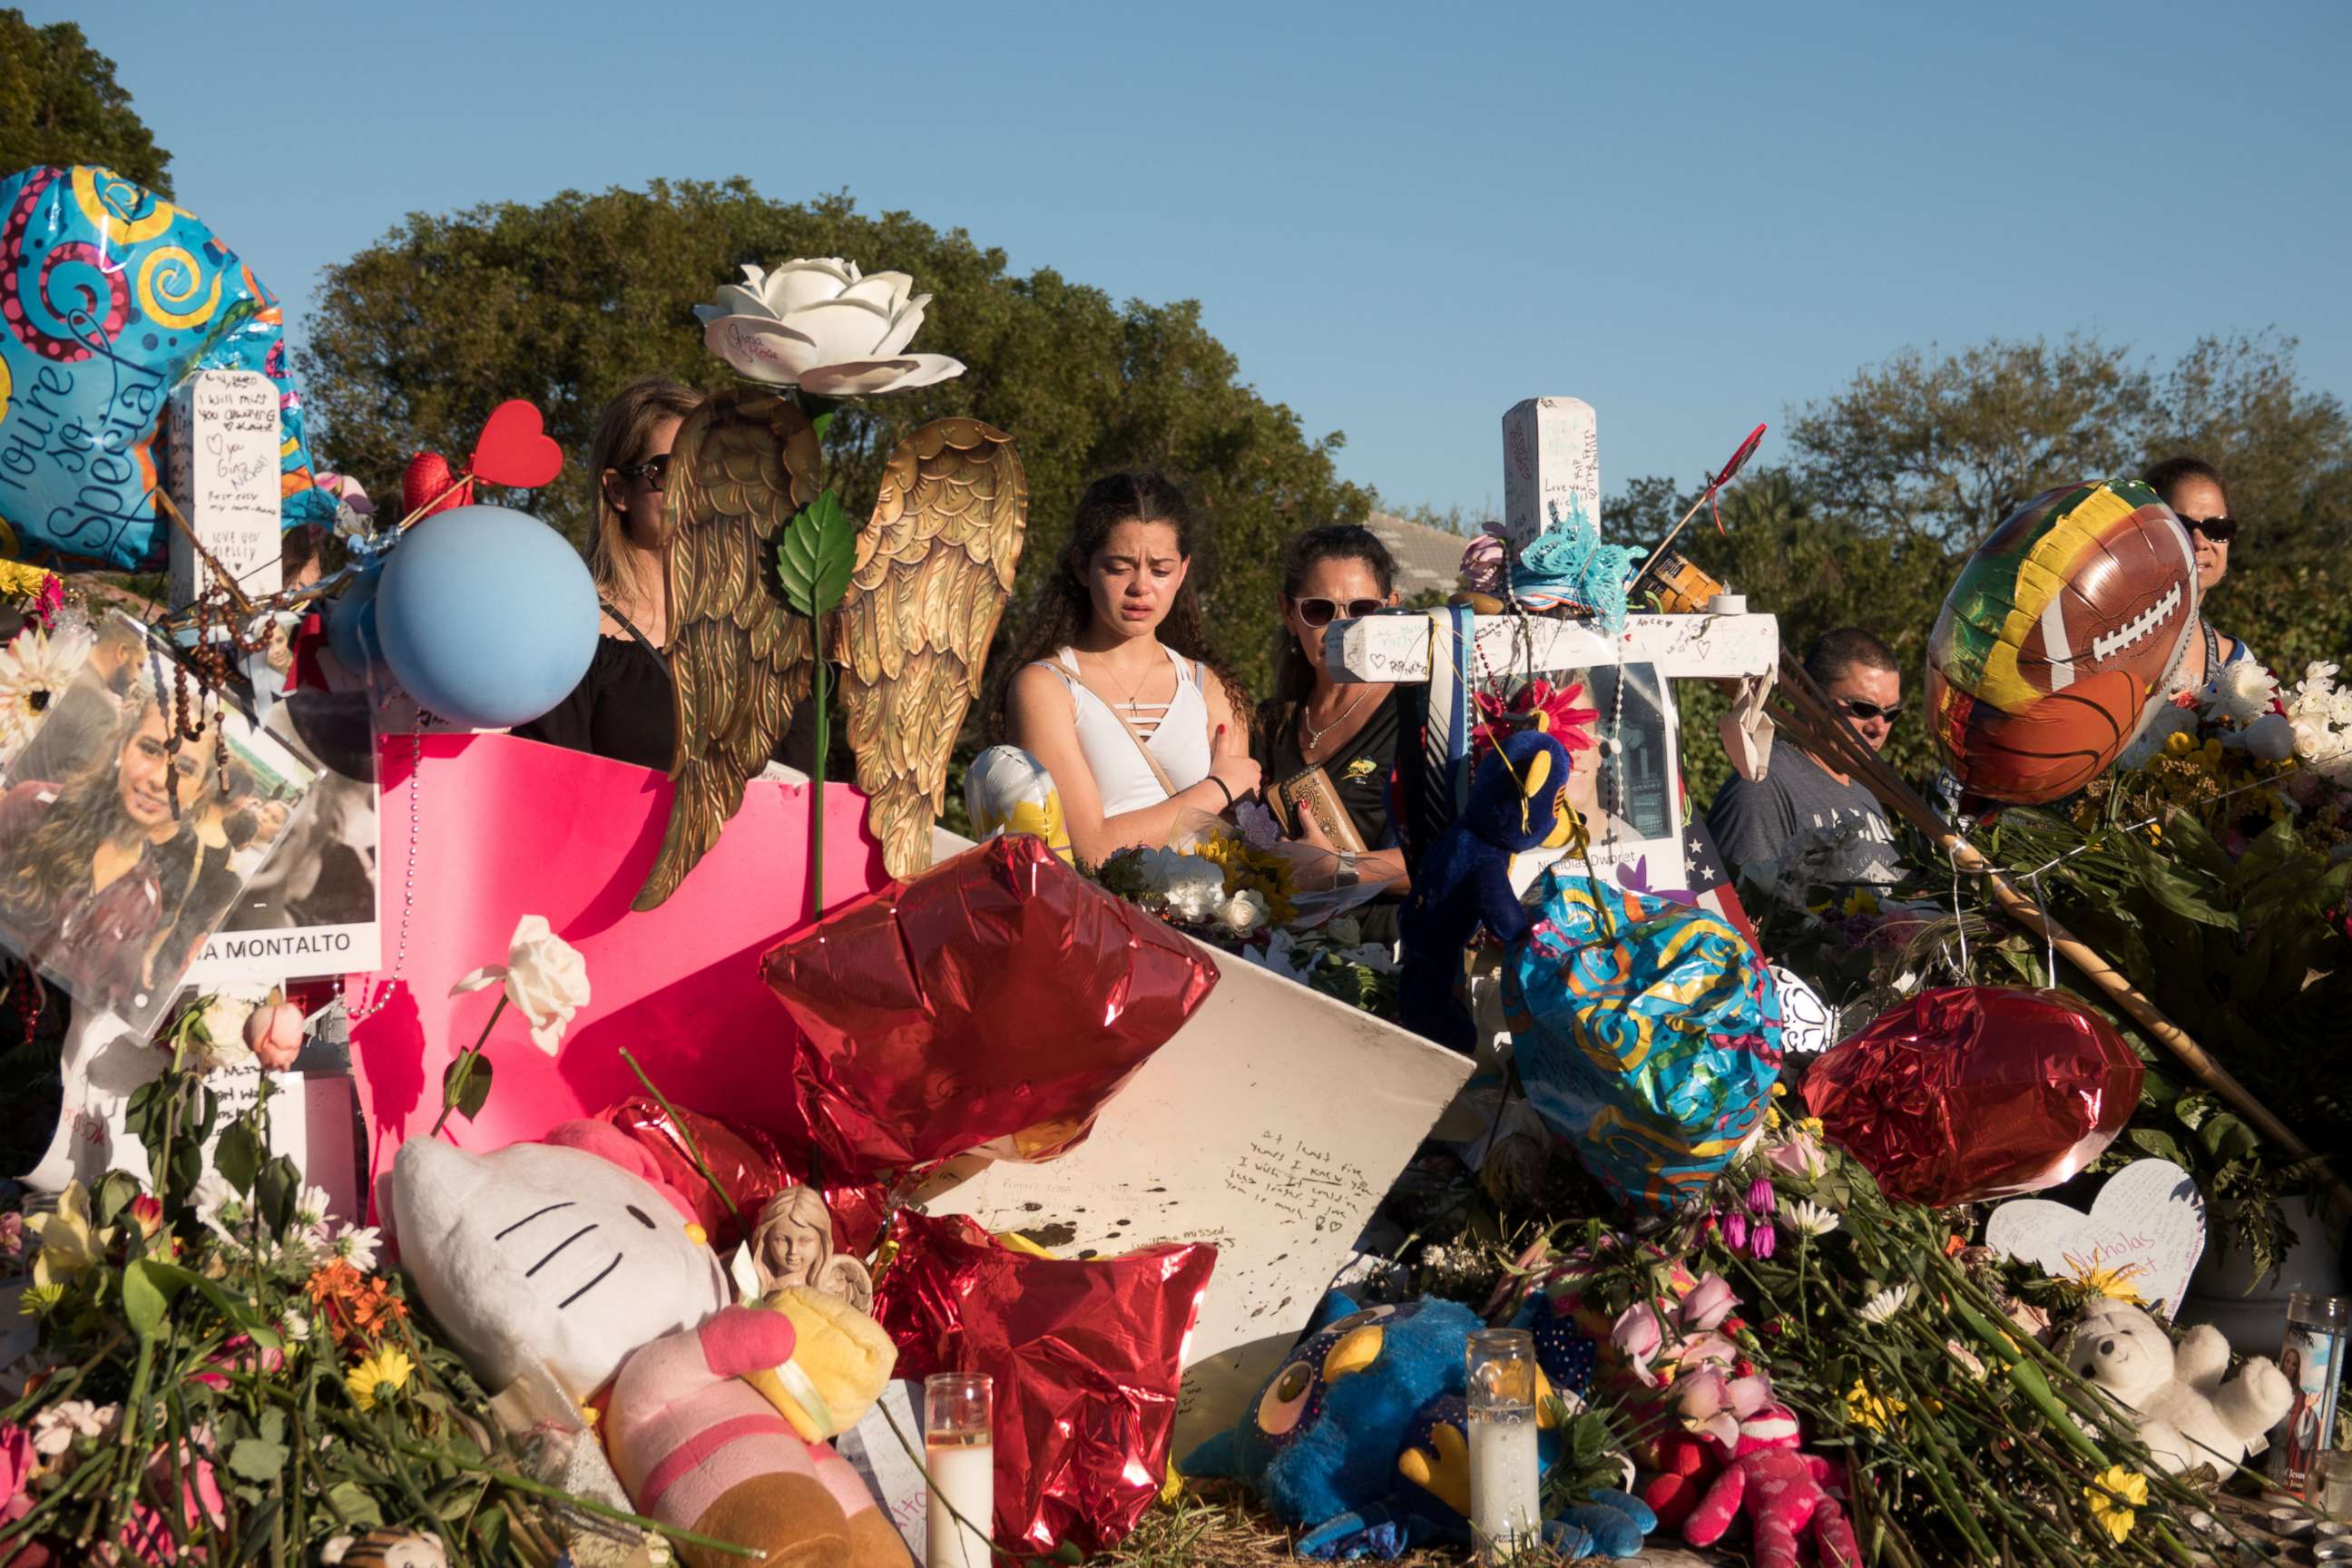 PHOTO: People are pictured at a memorial the day students and parents arrive for voluntary campus orientation at the Marjory Stoneman Douglas High School following last week's mass shooting in Parkland, Fla., Feb. 25, 2018.